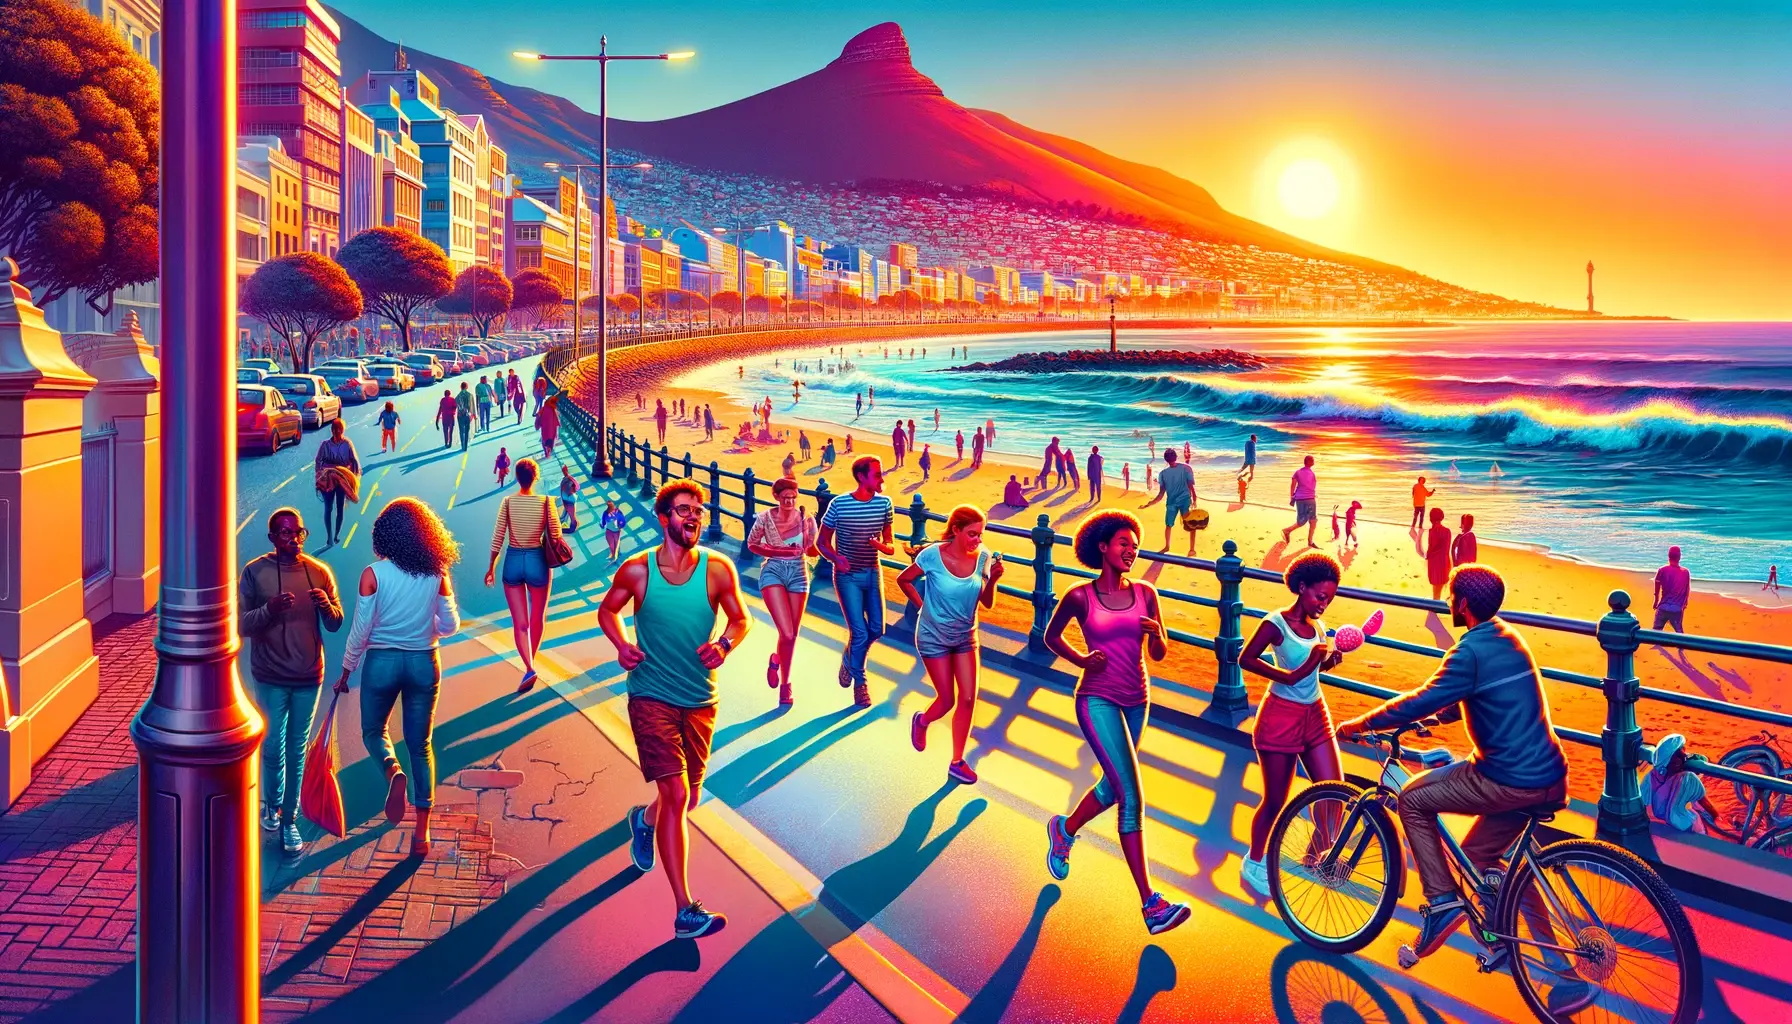 A vibrant and scenic image of Sea Point in Cape Town, suitable for a travel blog. The image portrays the bustling Sea Point promenade